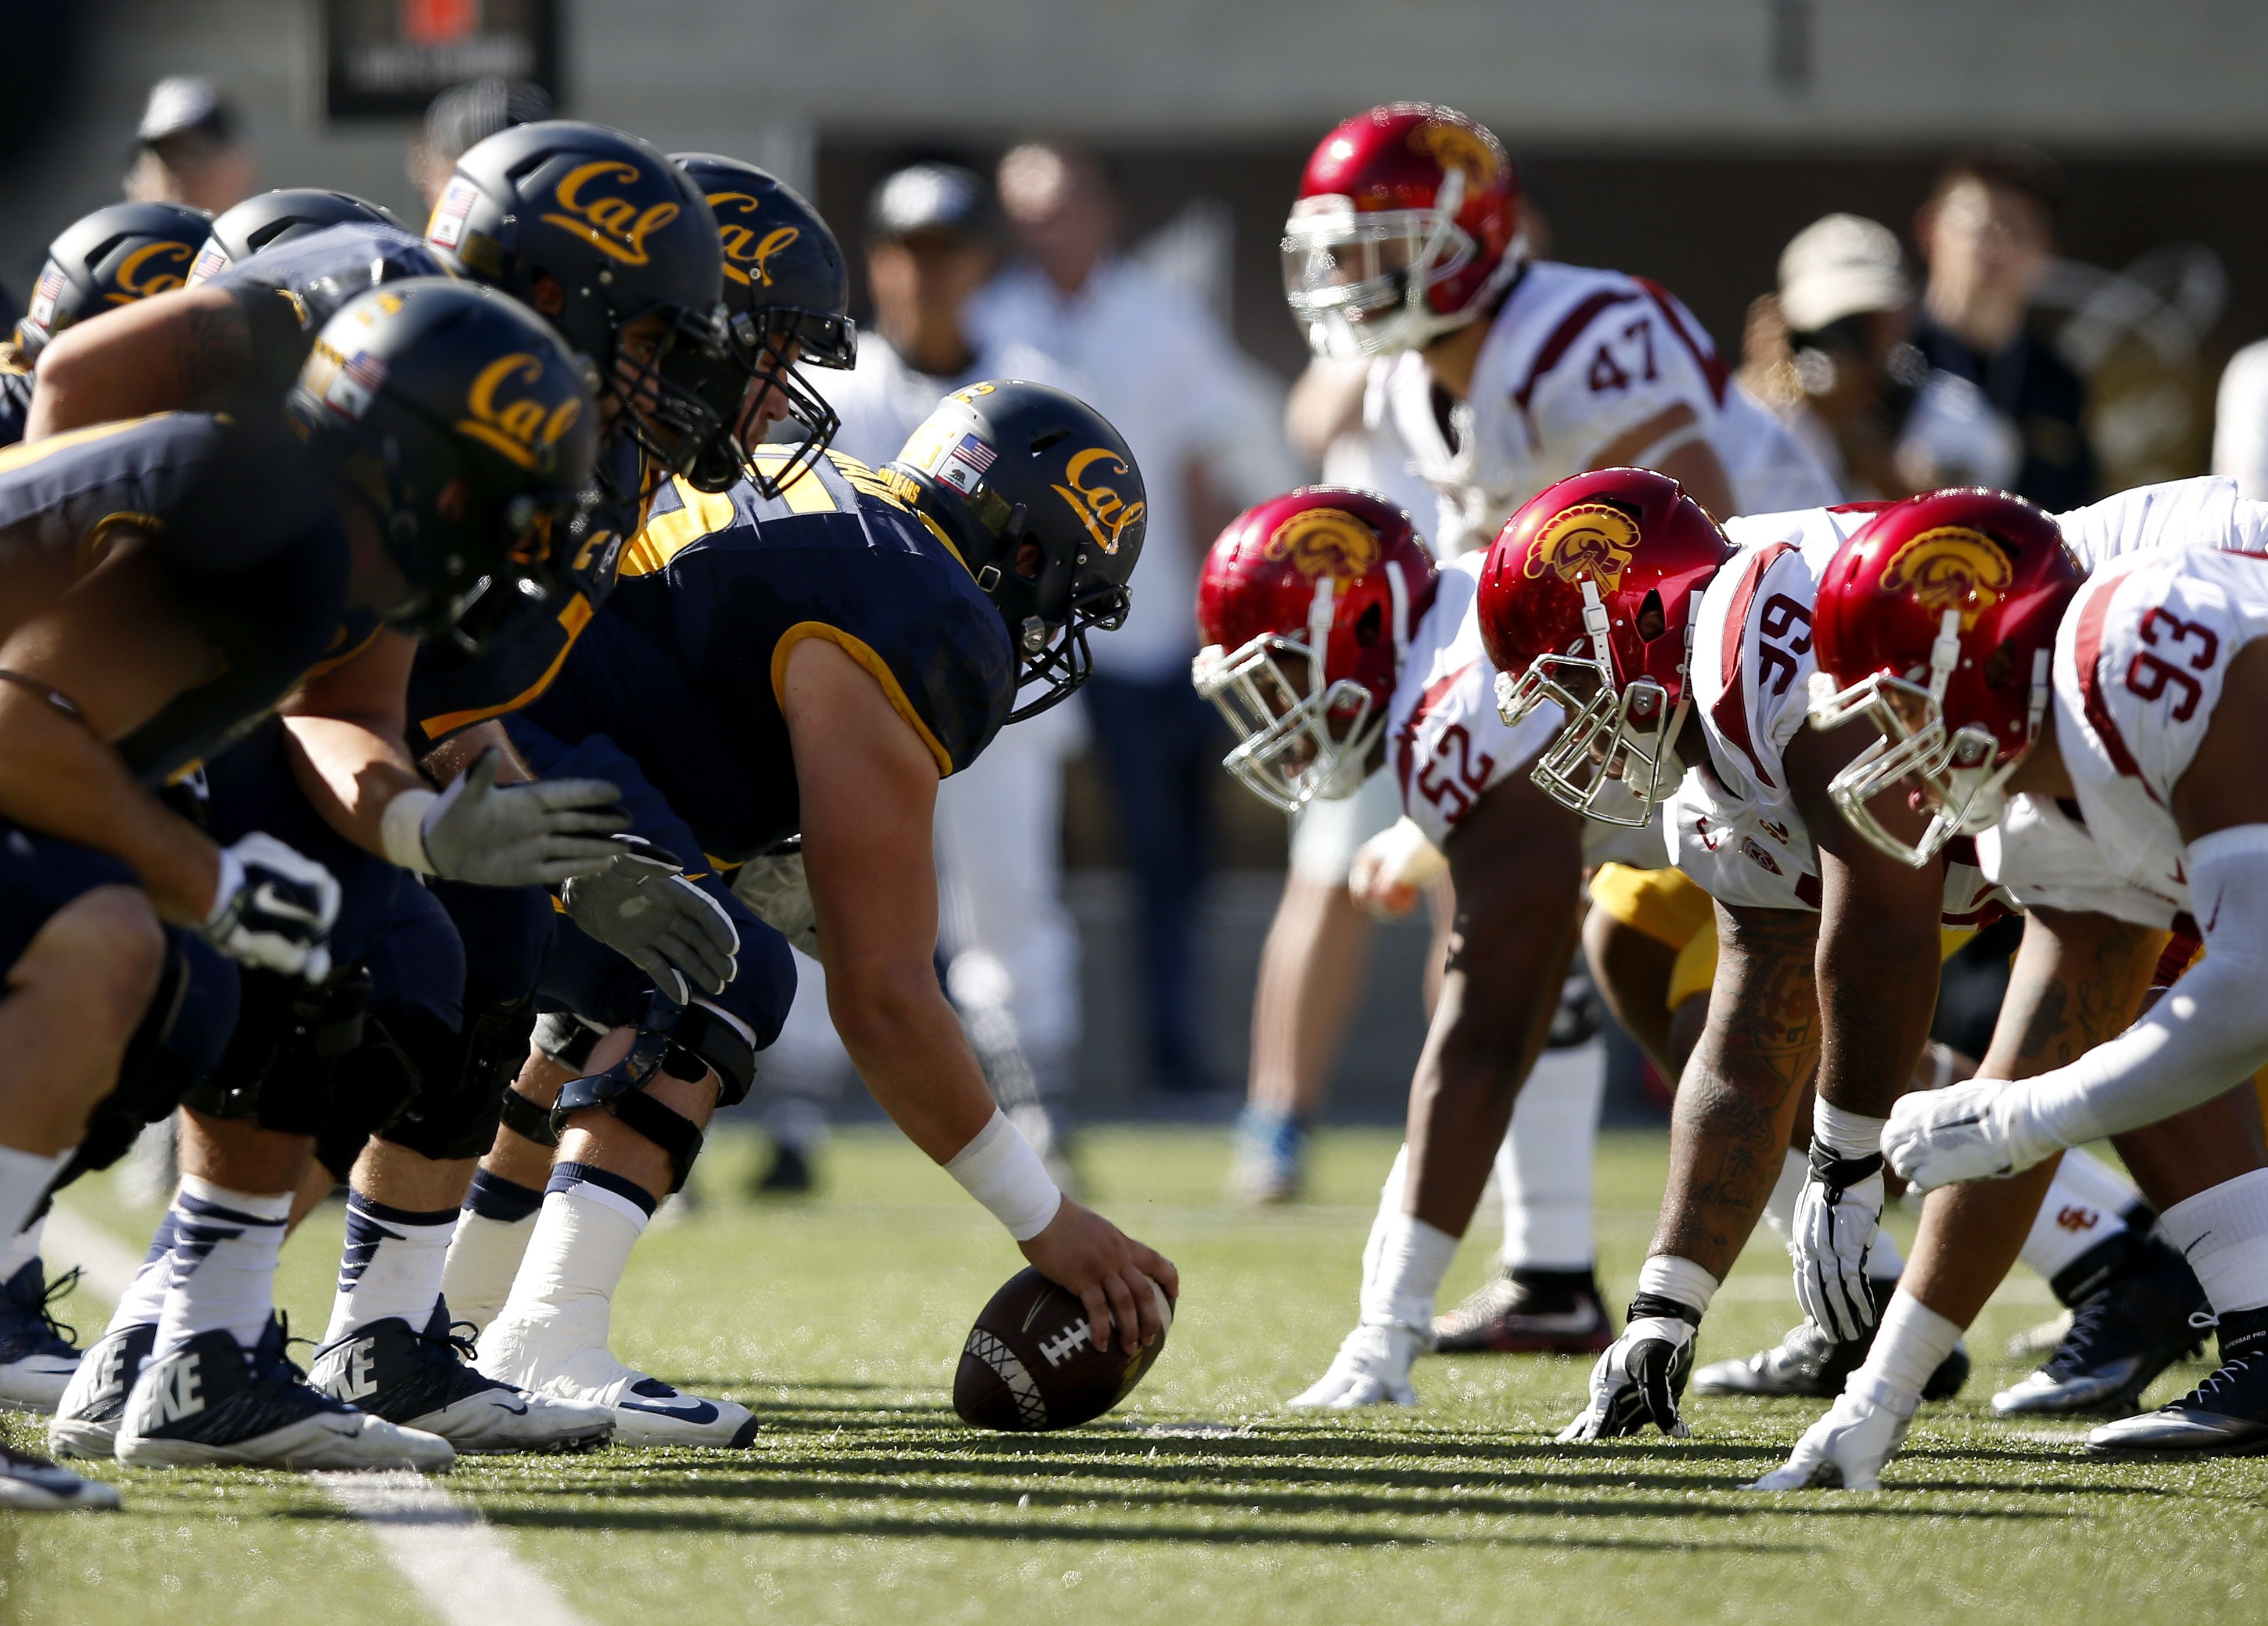 USC vs. Cal: Kickoff time for Trojans’ 2018 homecoming game announced